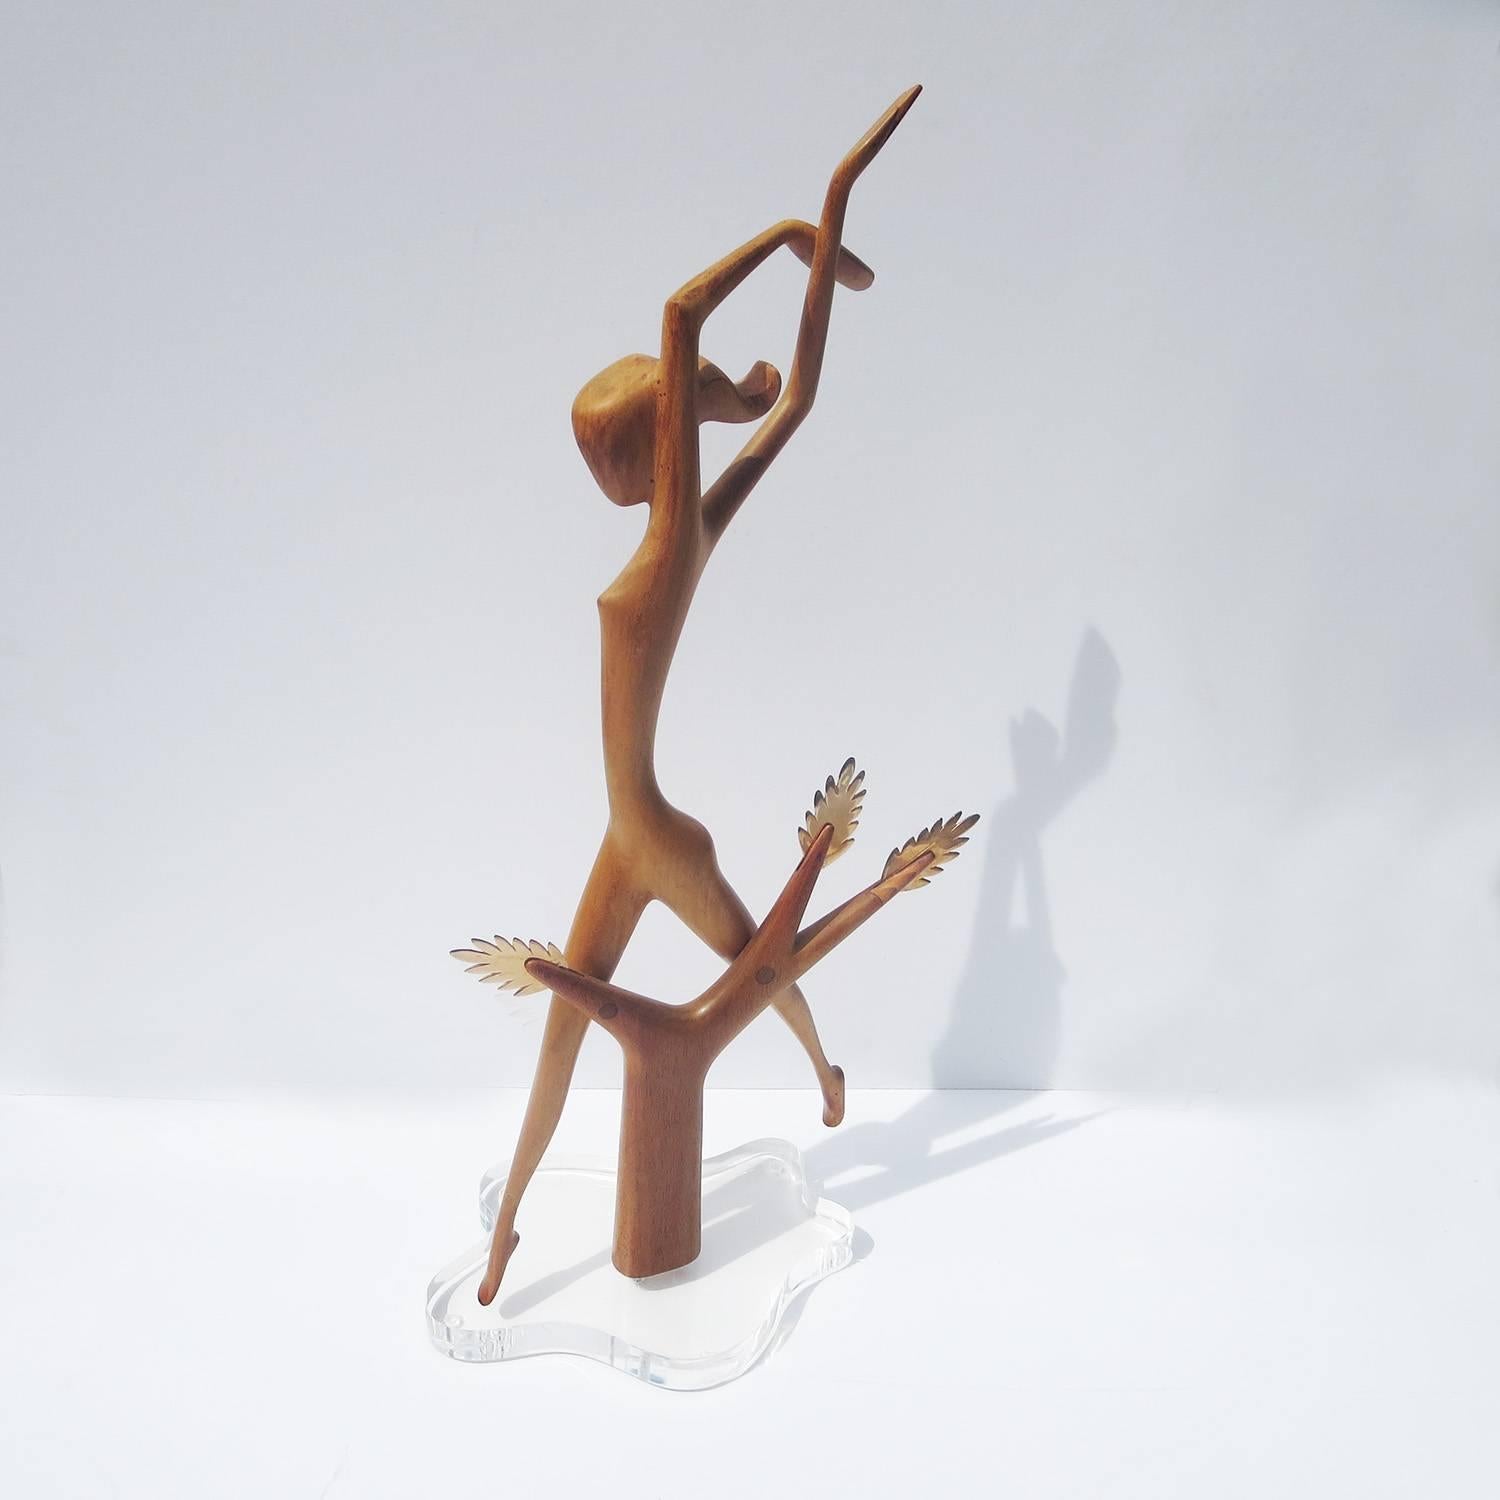 This wonderful sculpture was created by Karl Hagenauer, and appears in the published catalog 